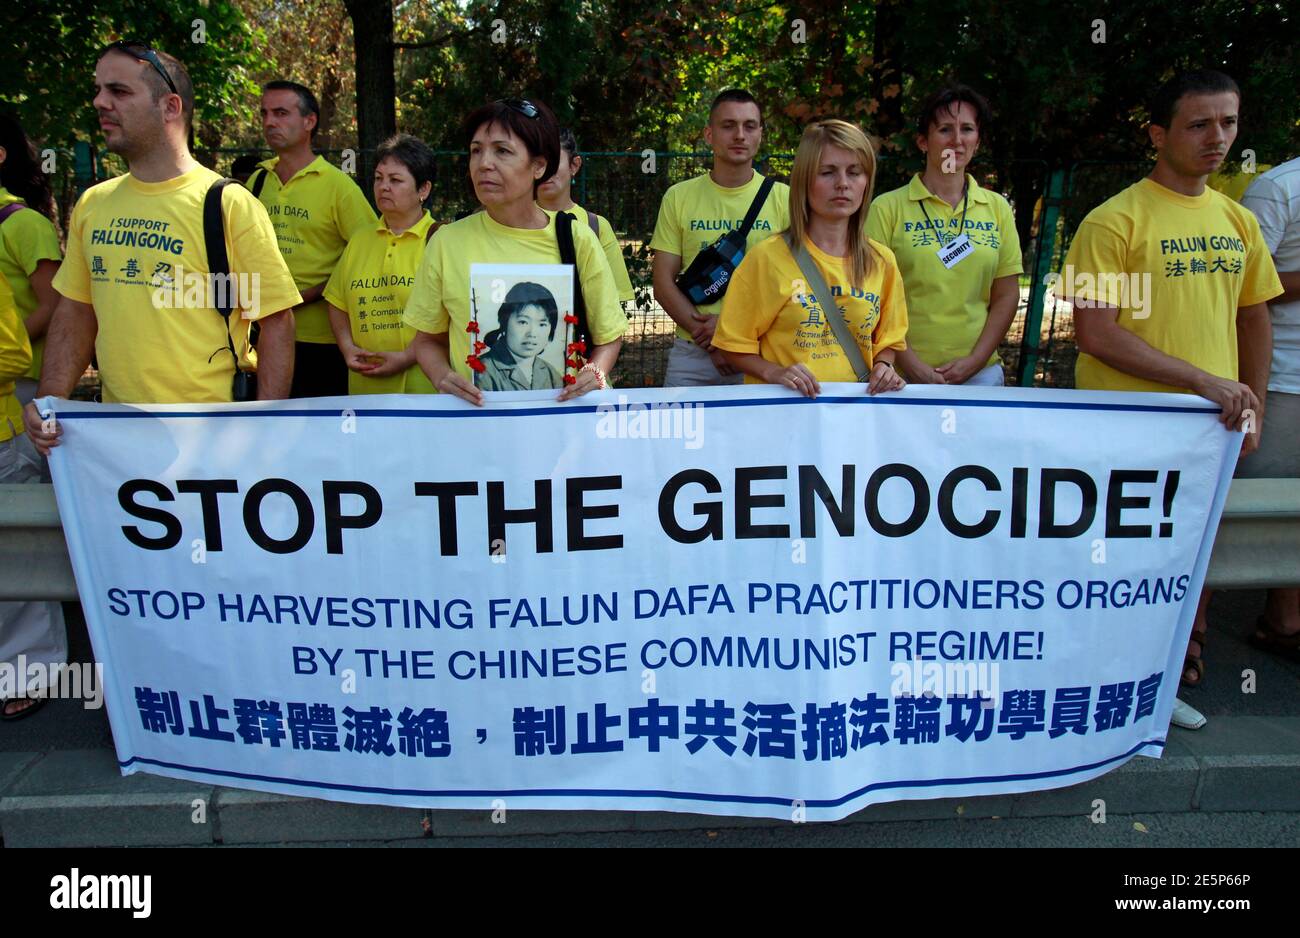 Falun Gong practitioners hold portraits of fellow Chinese practitioners as  they protest against China's crackdown on Falun Gong followers in front of  the Chinese embassy in Bucharest September 24, 2011. Falun Gong was banned  in China in 1999 and over ...